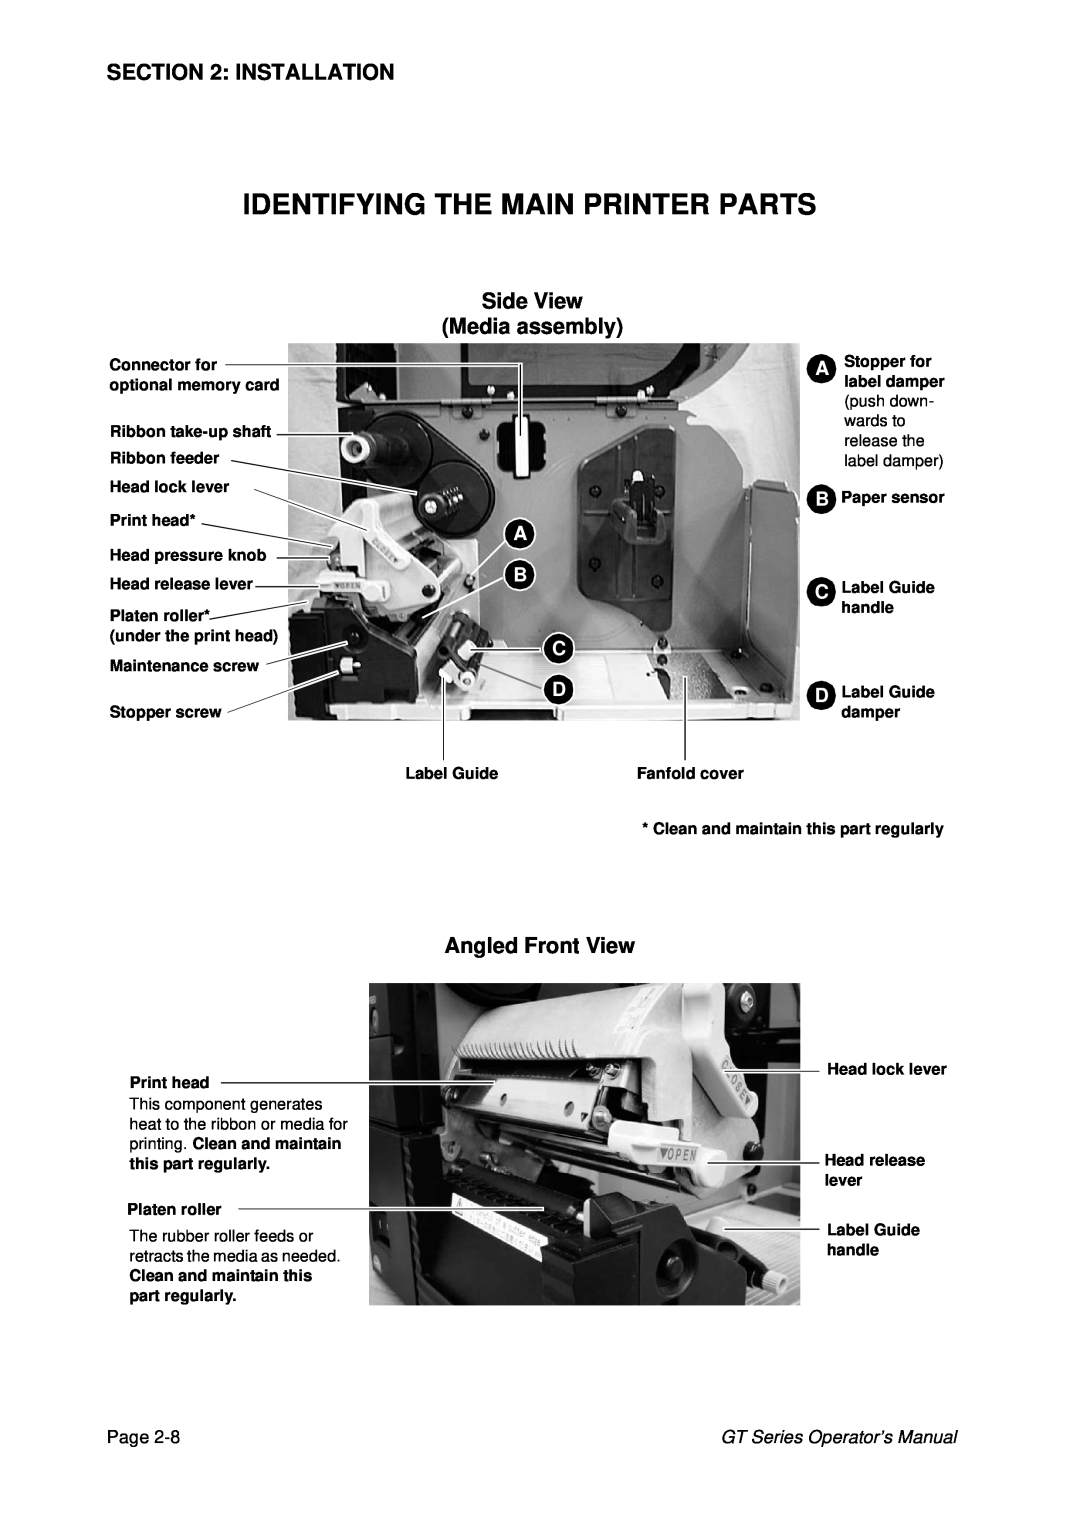 SATO GT424 manual Side View Media assembly, Identifying The Main Printer Parts, Installation, Angled Front View 